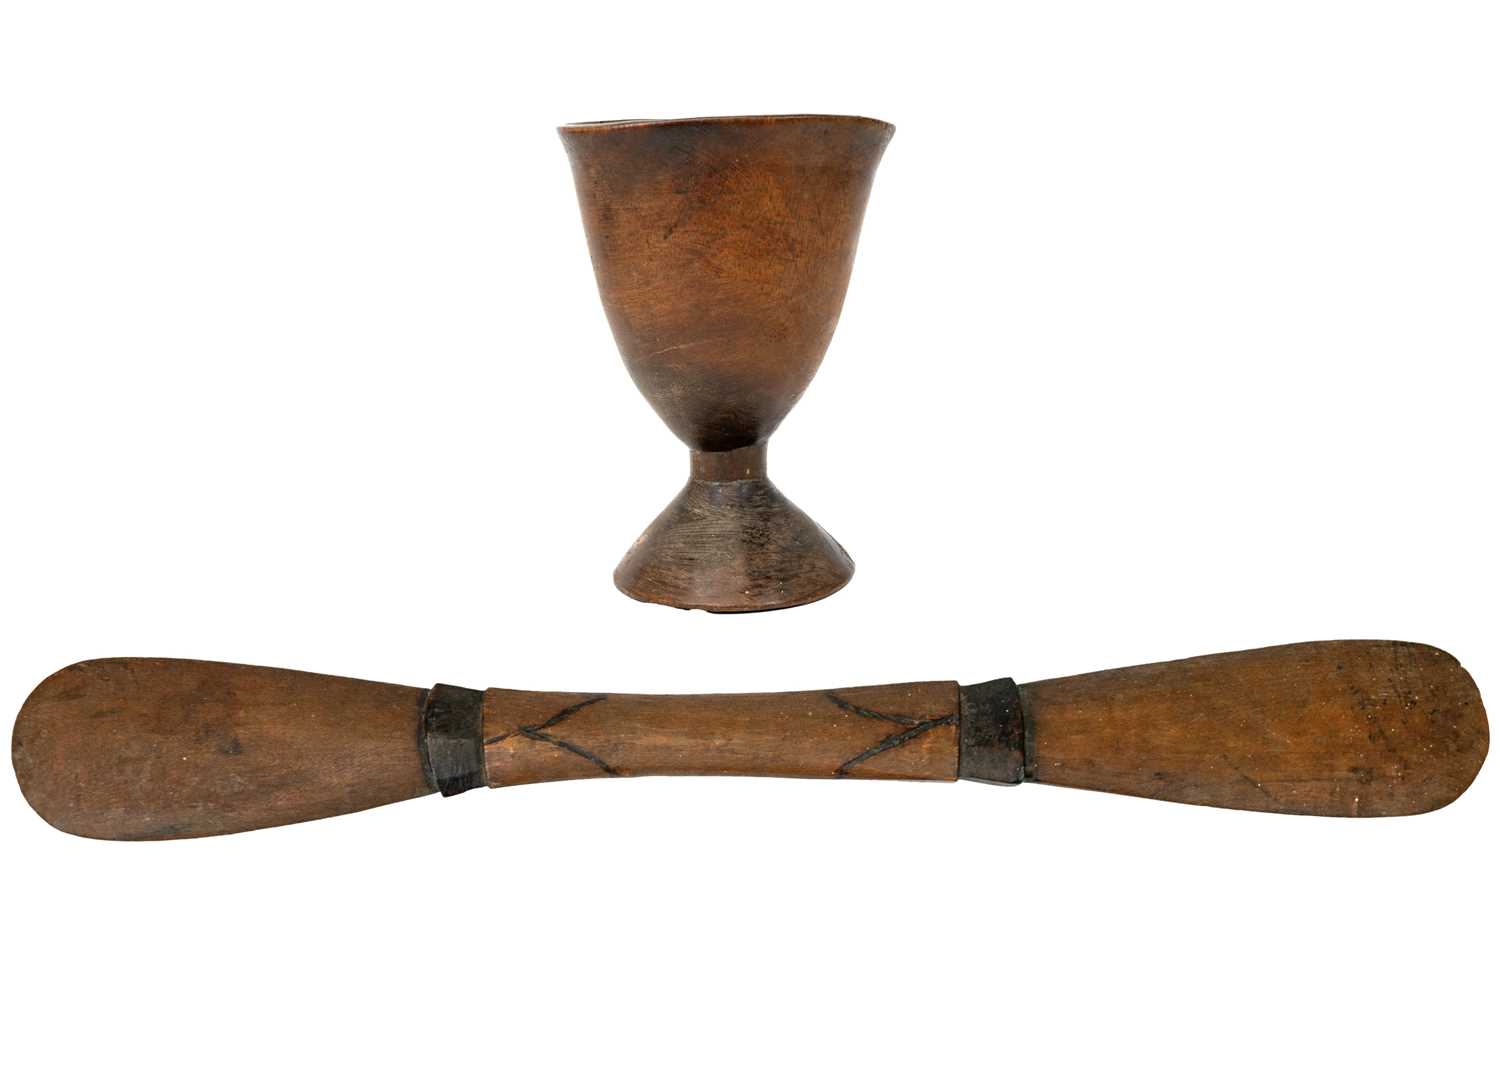 An African carved chalice or libation cup.